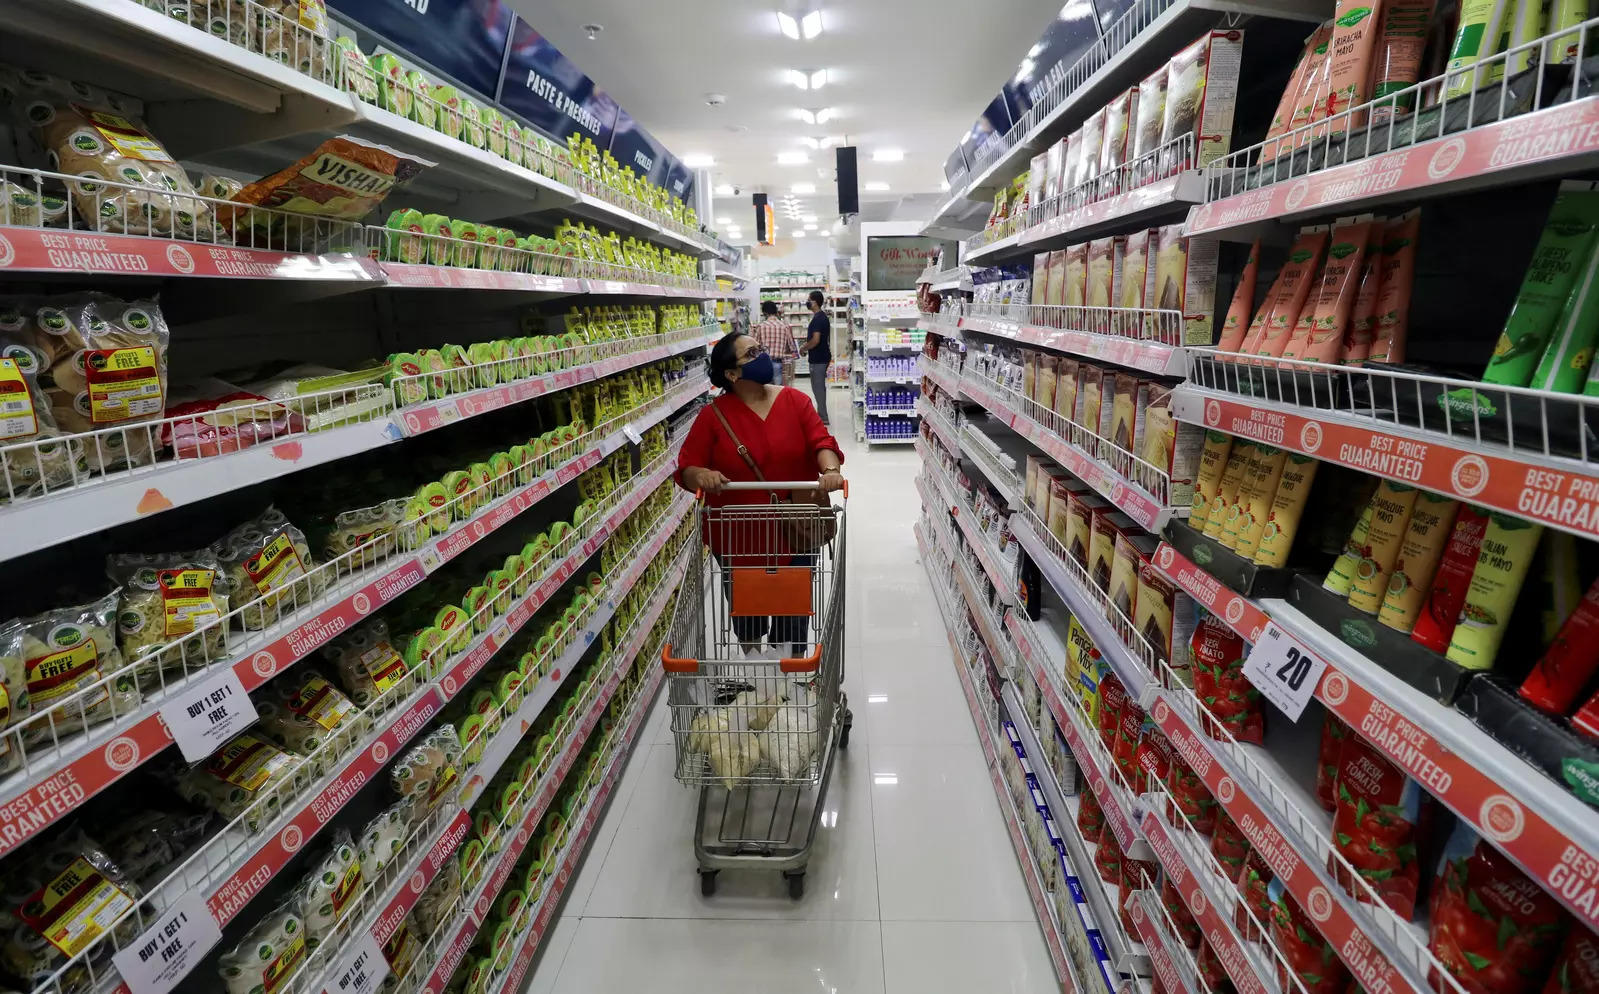 Intend to pursue 'all available avenues' to save deal with Reliance: Future Retail